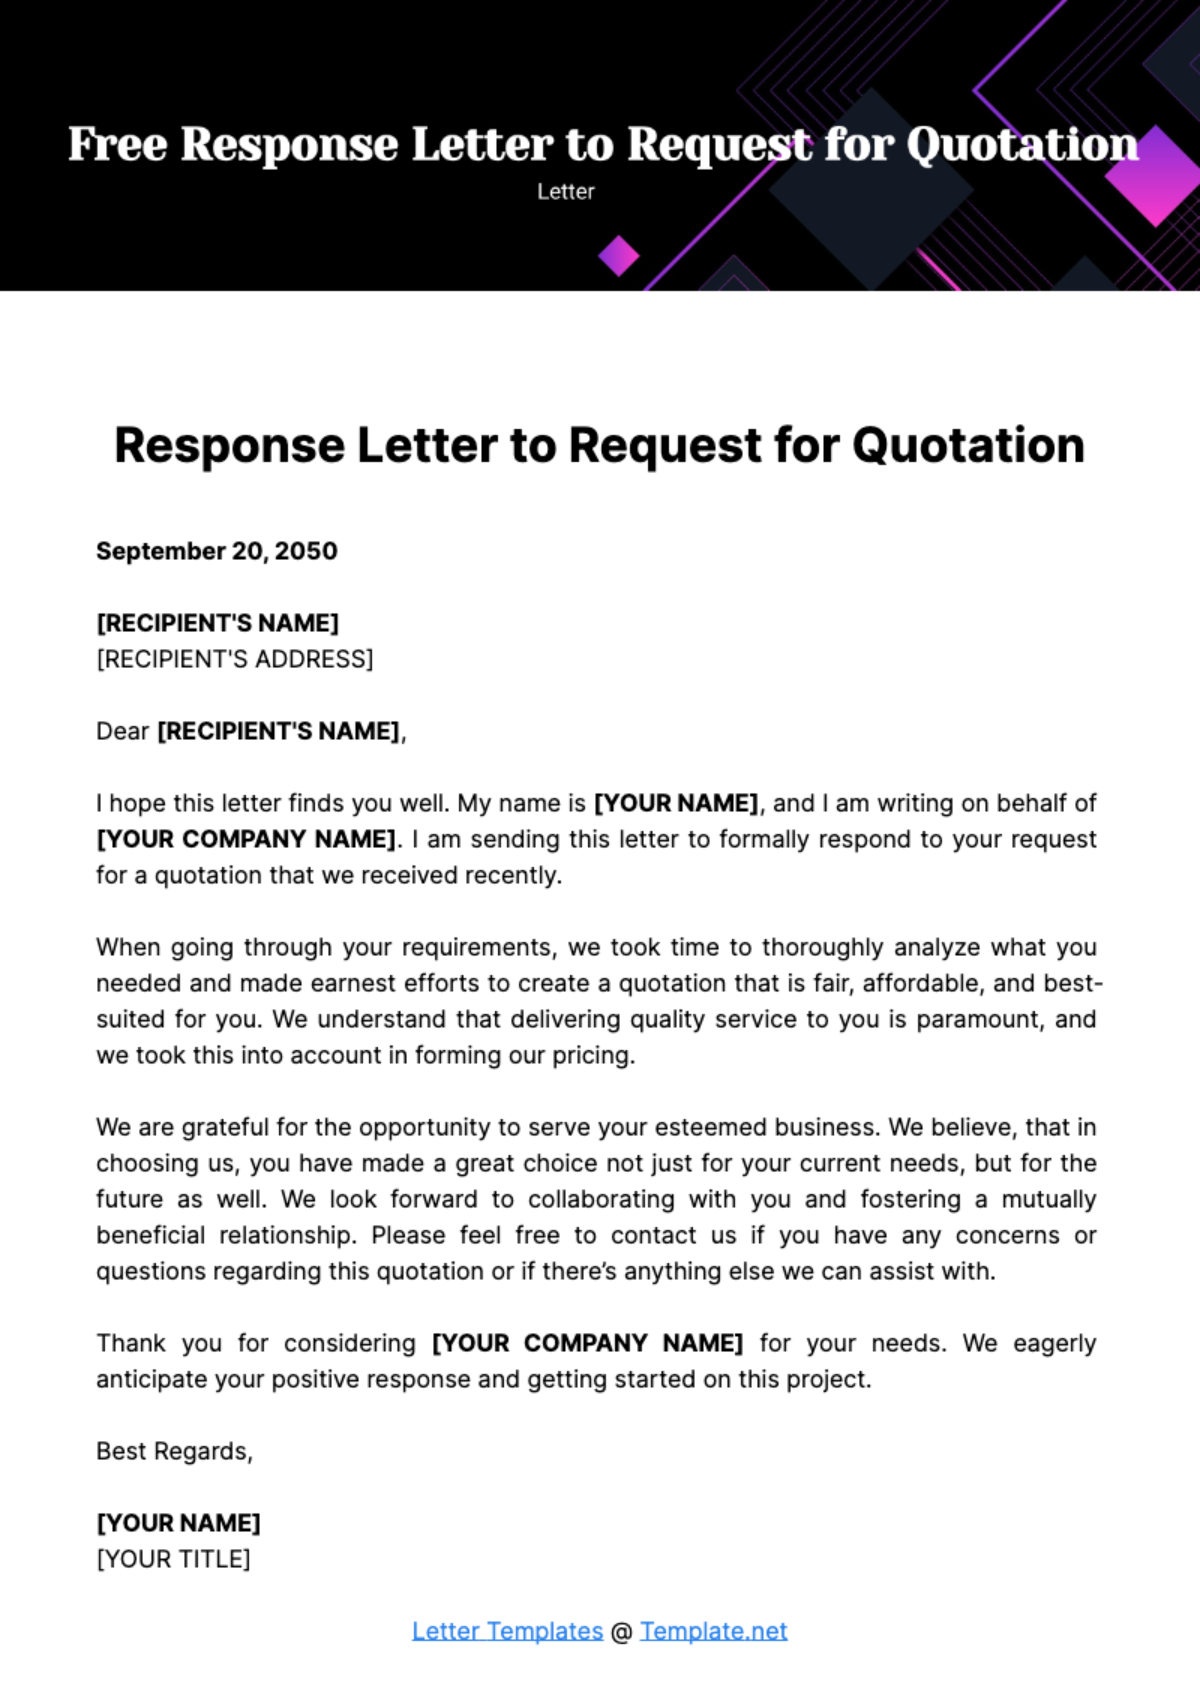 Free Response Letter to Request for Quotation Template